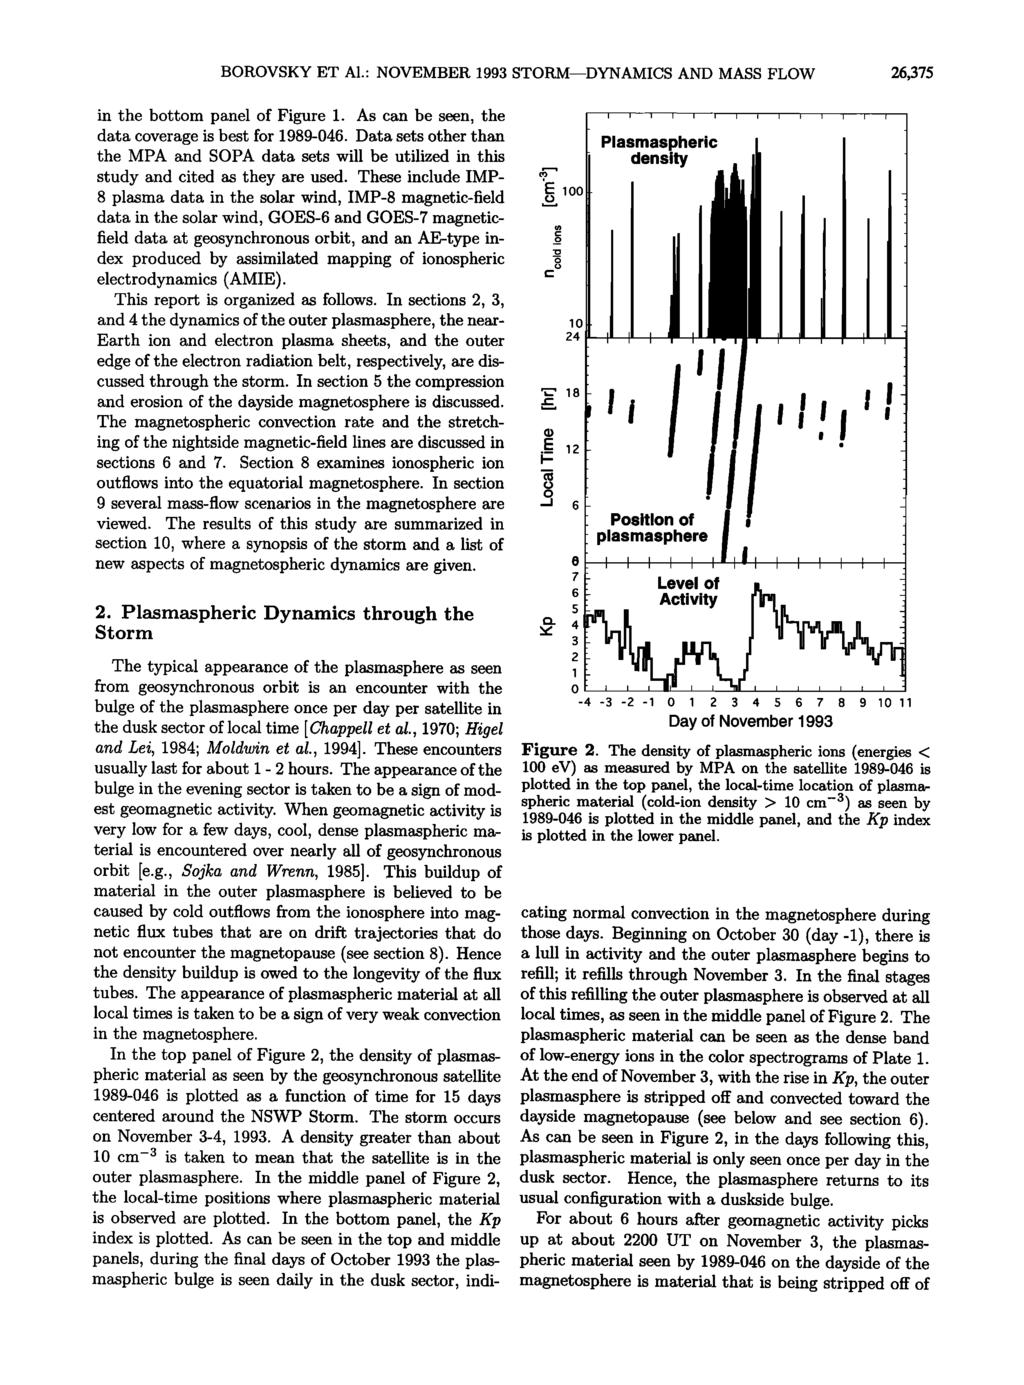 _ BOROVSKY ET A1' NOVEMBER 1993 STORM--DYNAMICS AND MASS FLOW 26,375 in the bottom panel of Figure 1 As can be seen, the data coverage is best for 1989-046 Data sets other than the MPA and SOPA data